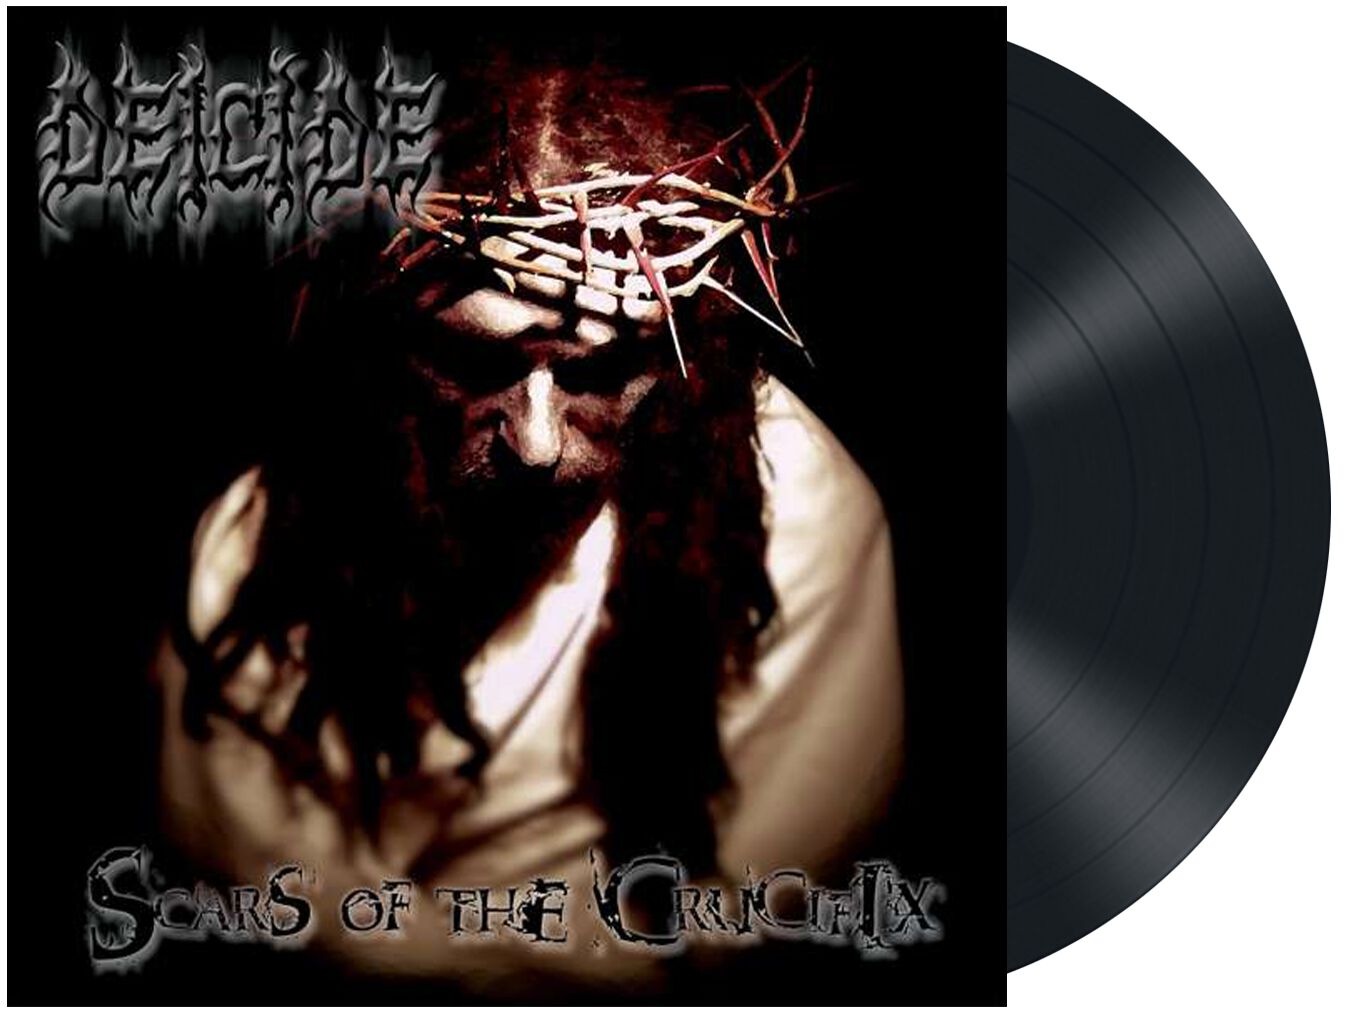 Image of Deicide Scars of the crucifix LP schwarz